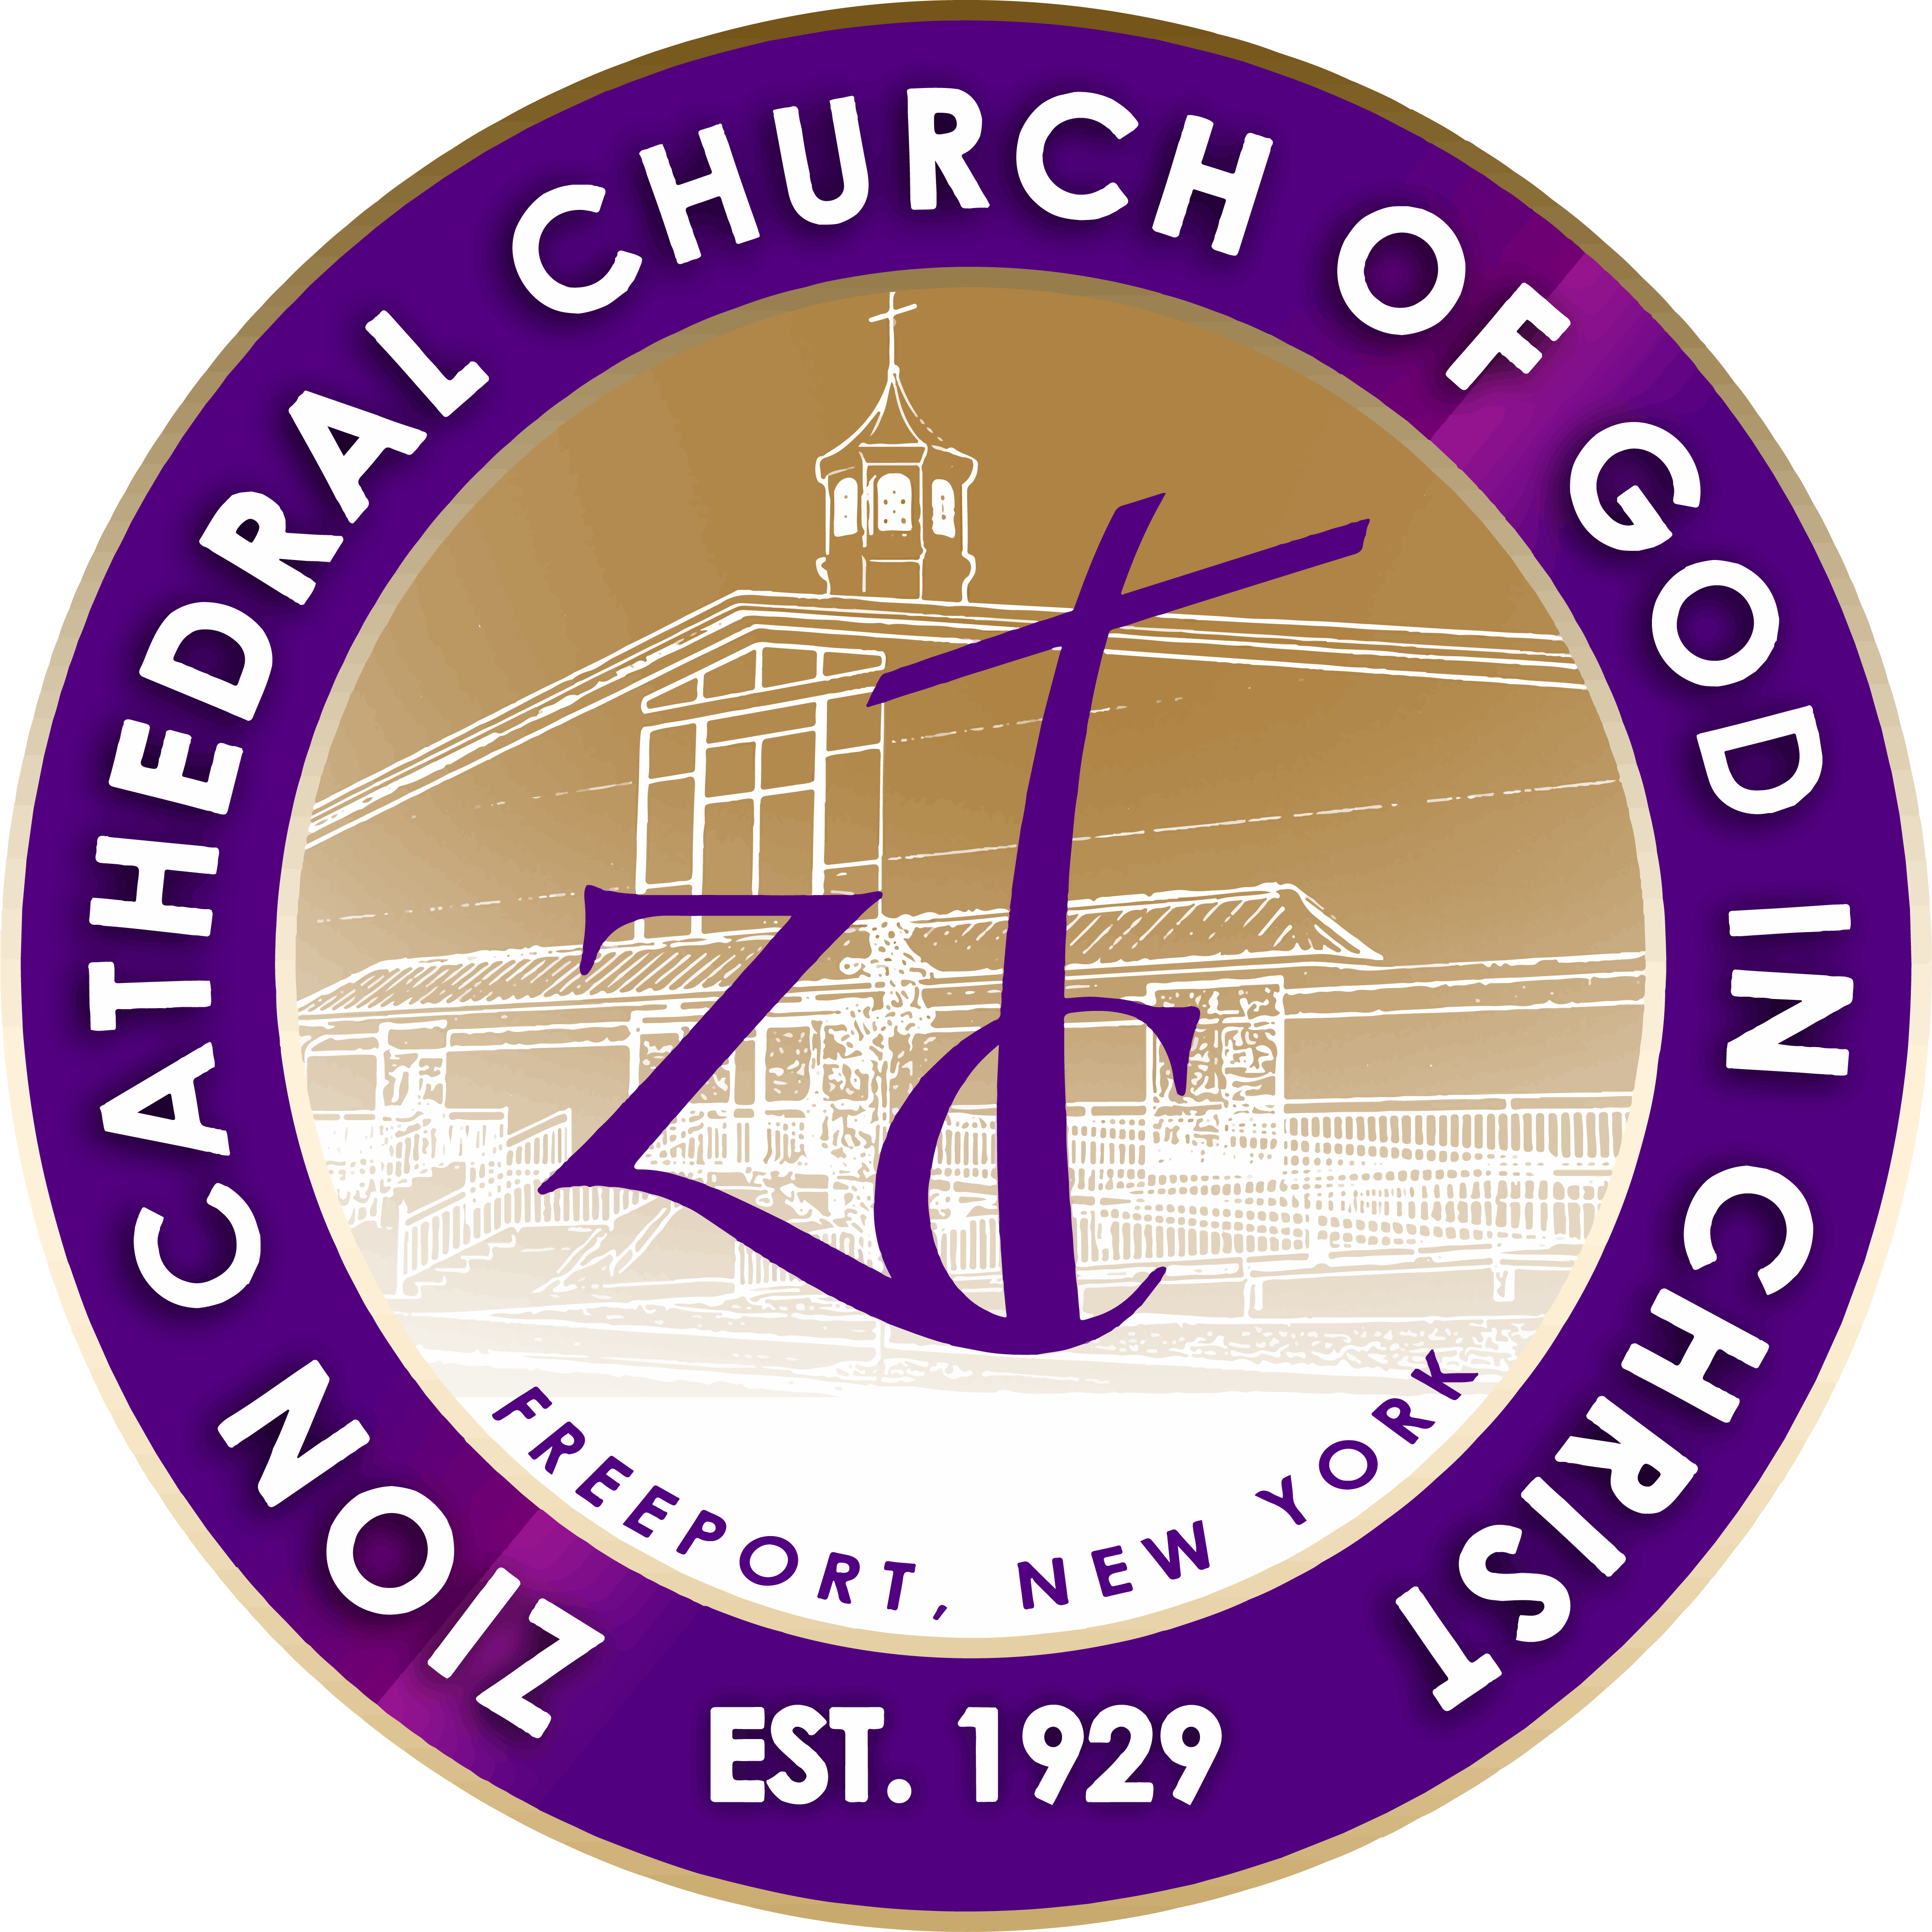 Zion Cathedral Church of God in Christ